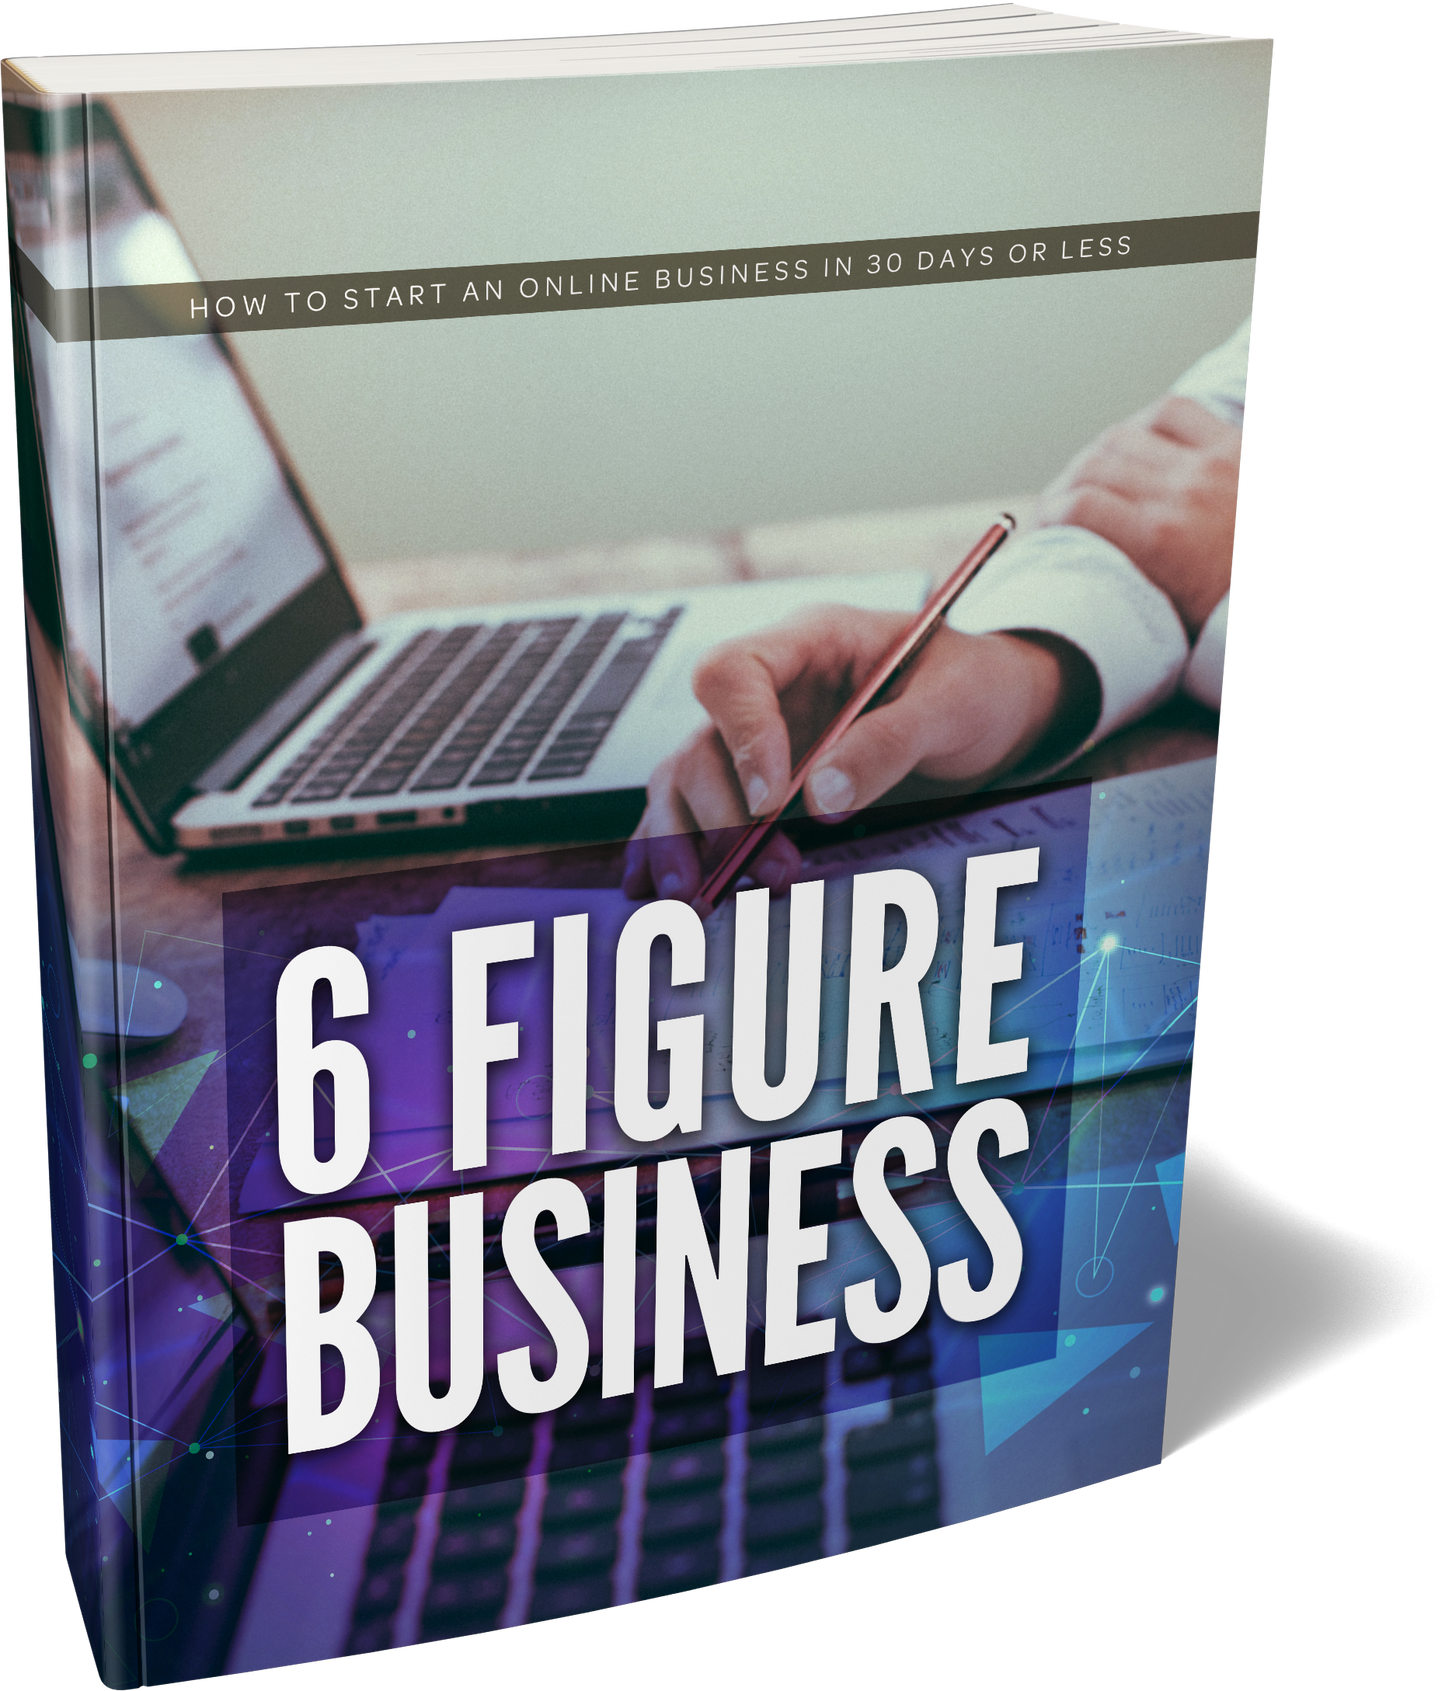 6 Figure Business - How to Start An Online Business in 30 Days or Less